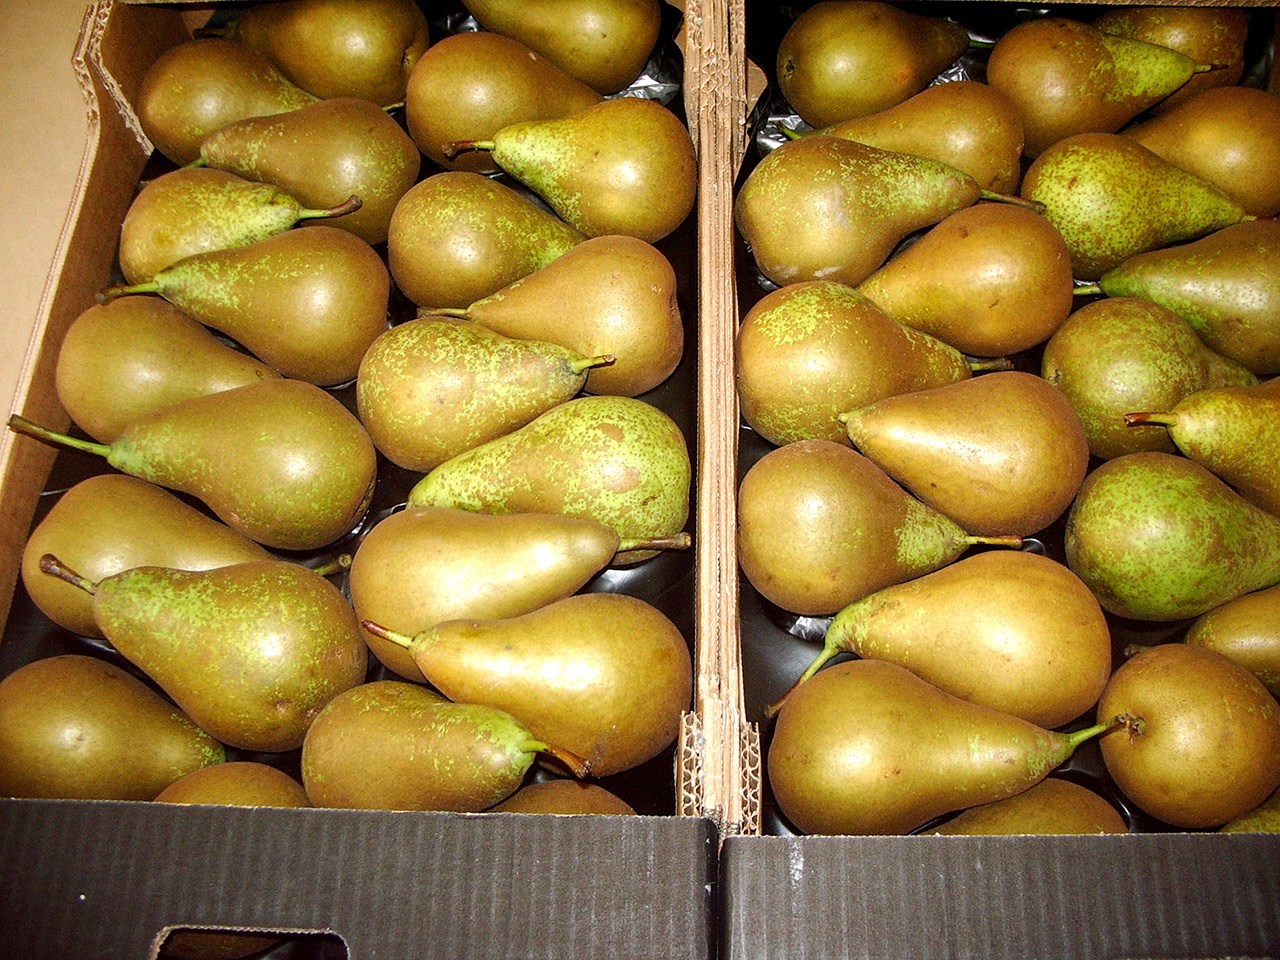 cascina-palazzo-conference-pears